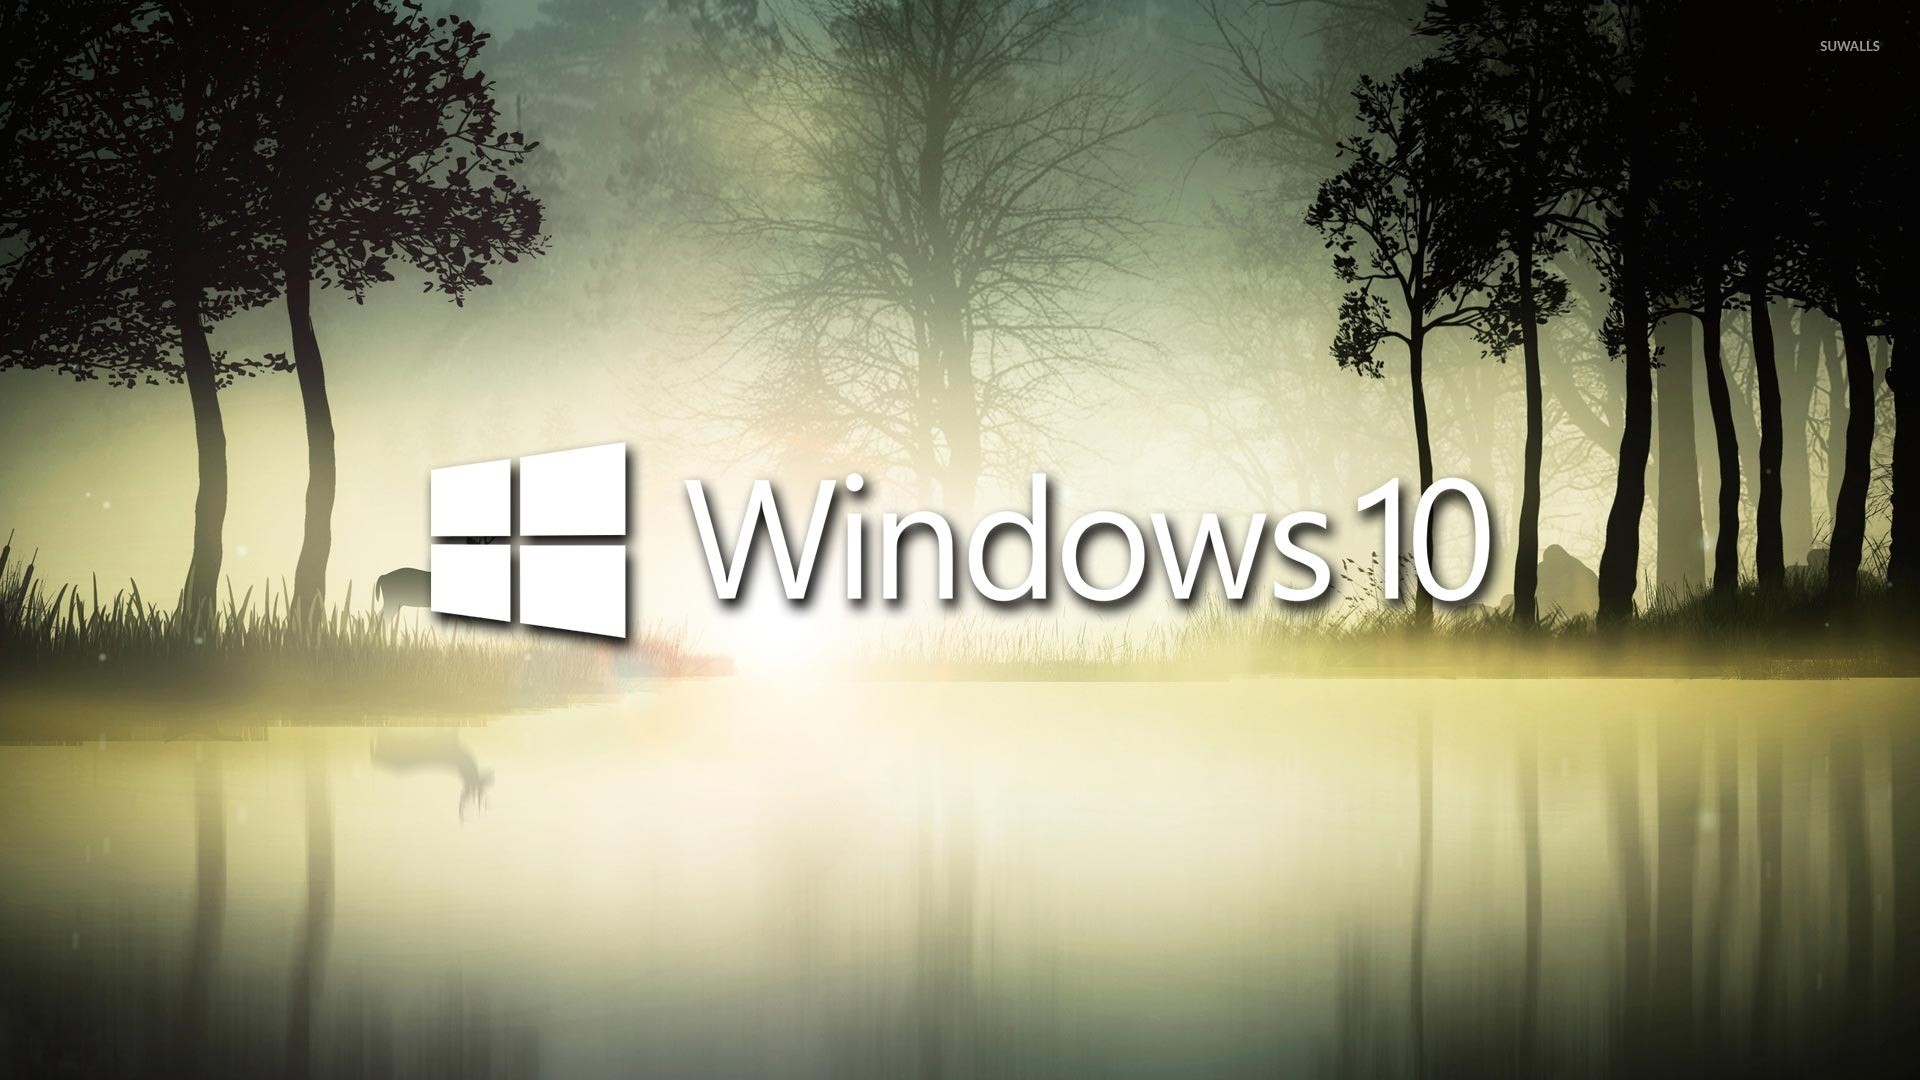 Windows 10 in the foggy forest wallpaper